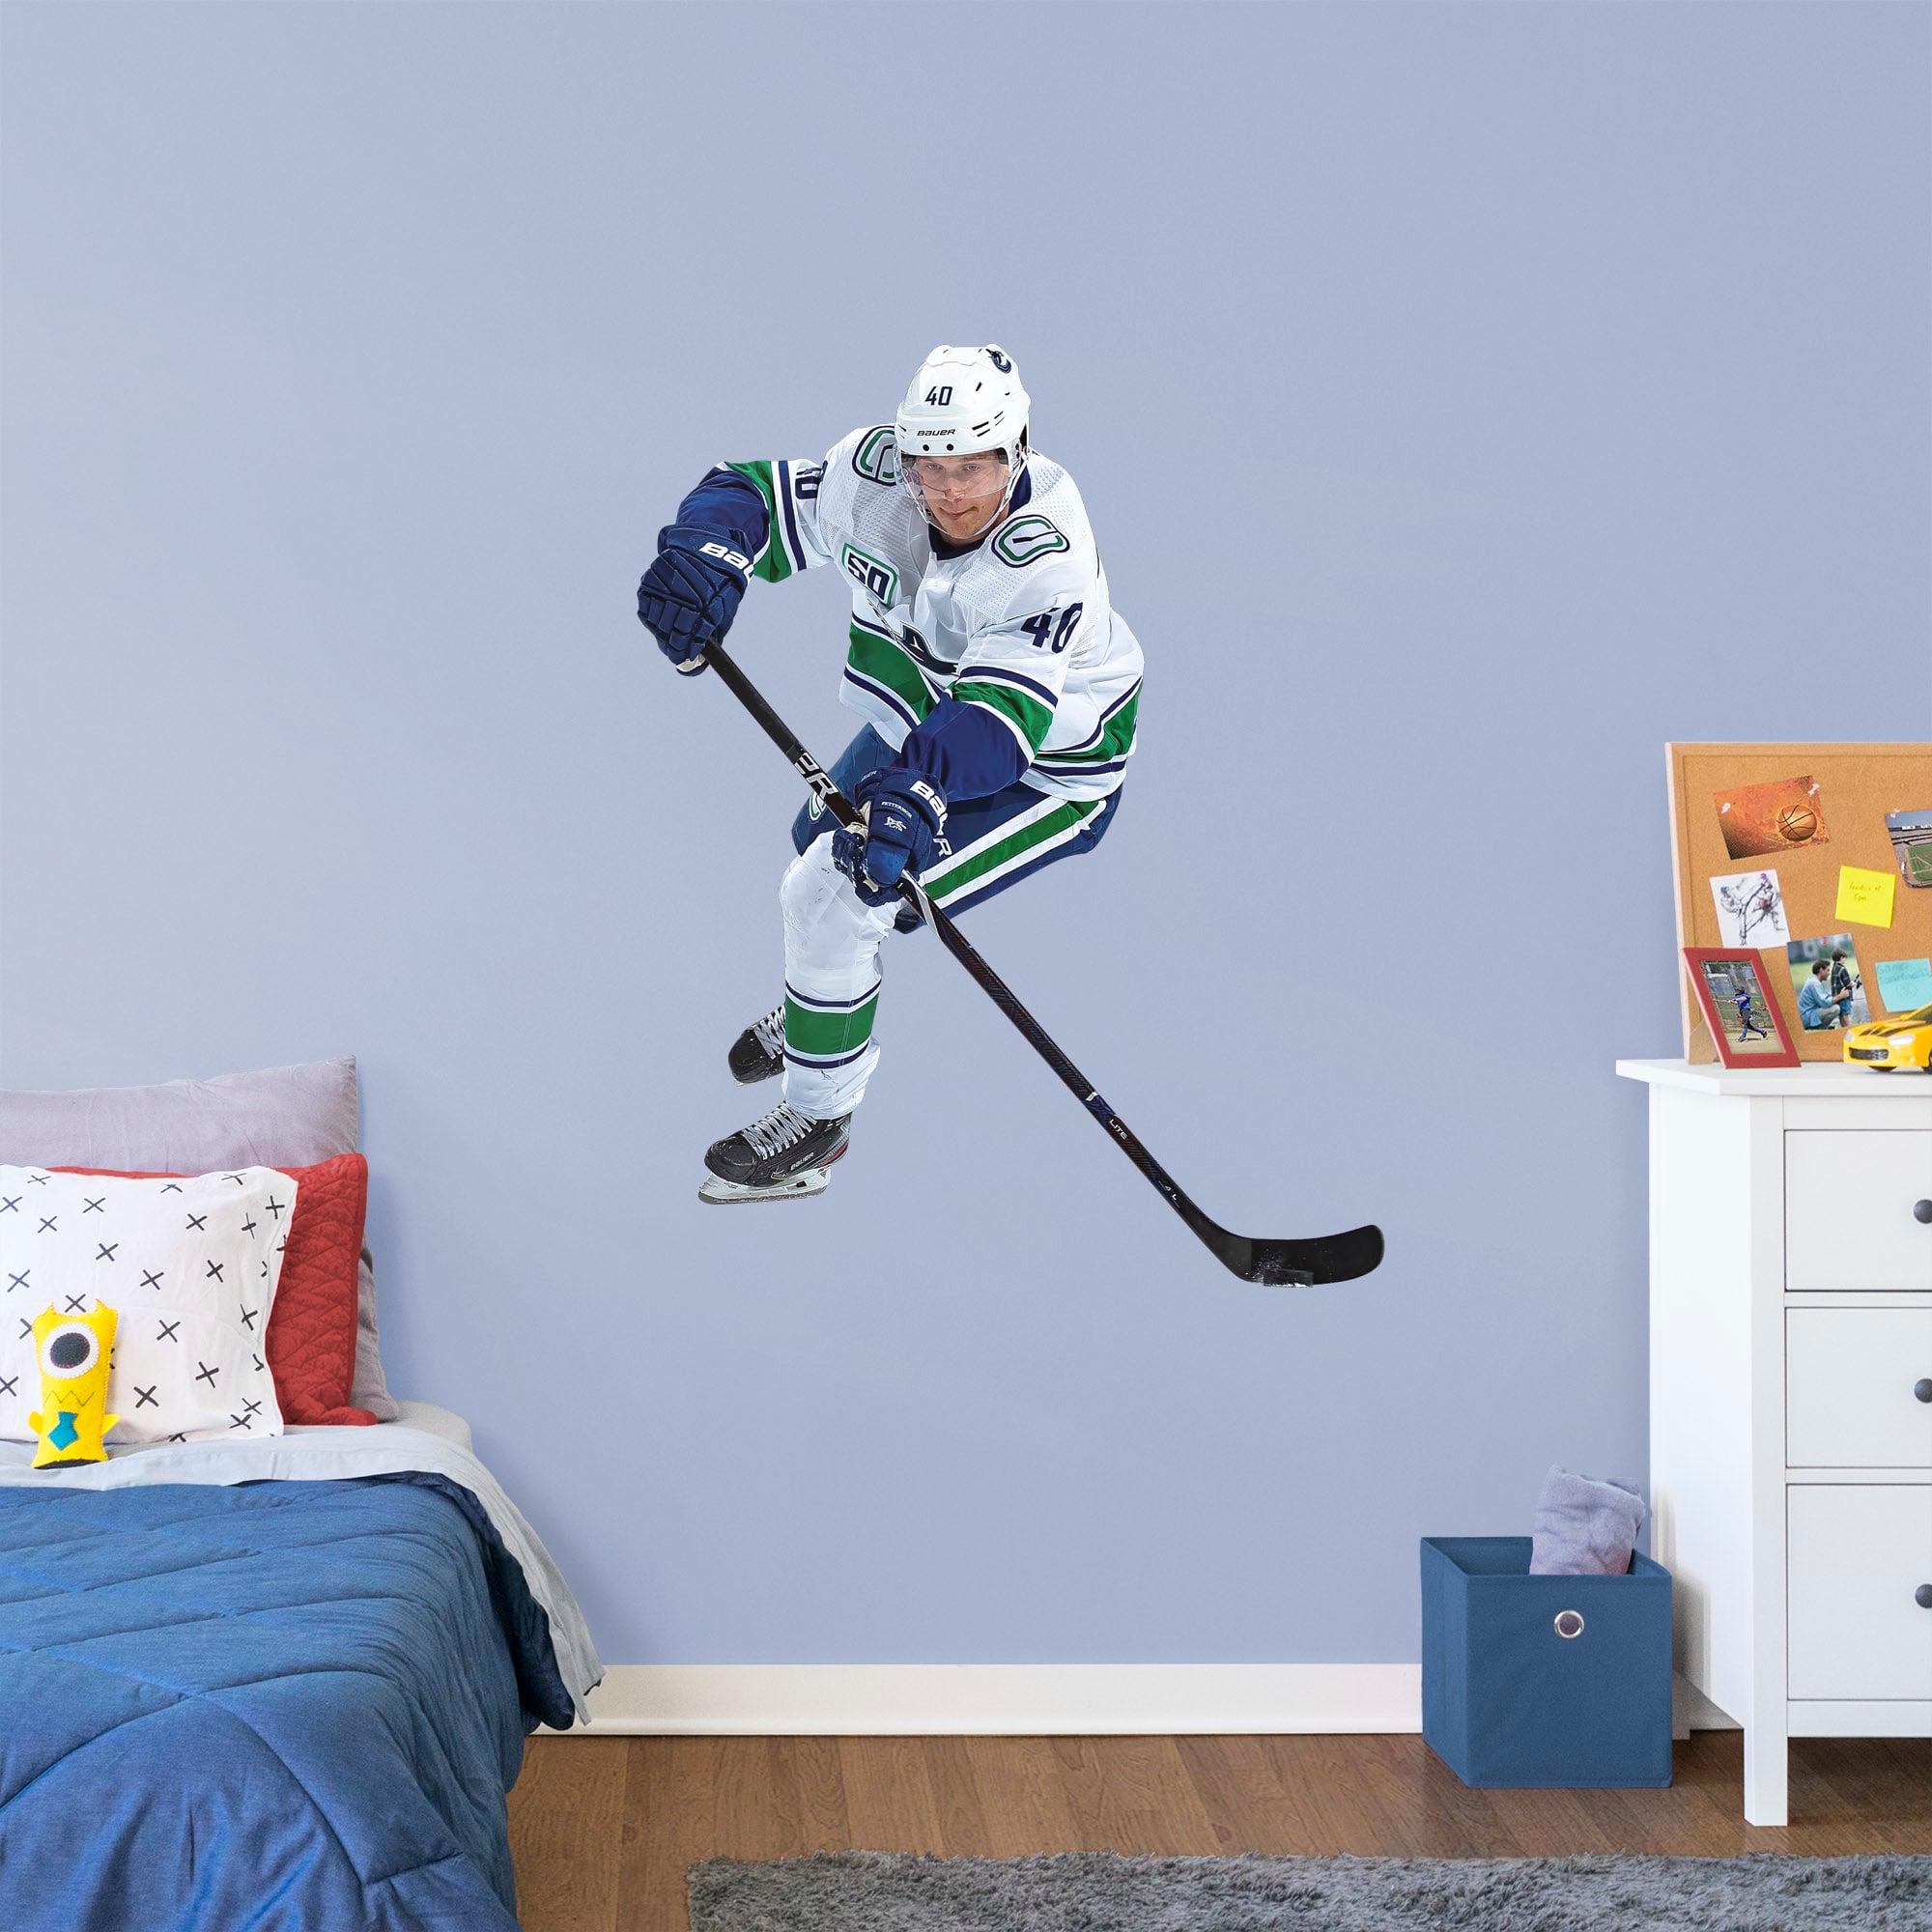 Elias Pettersson for Vancouver Canucks - Officially Licensed NHL Removable Wall Decal Giant Athlete + 2 Decals (44"W x 56"H) by